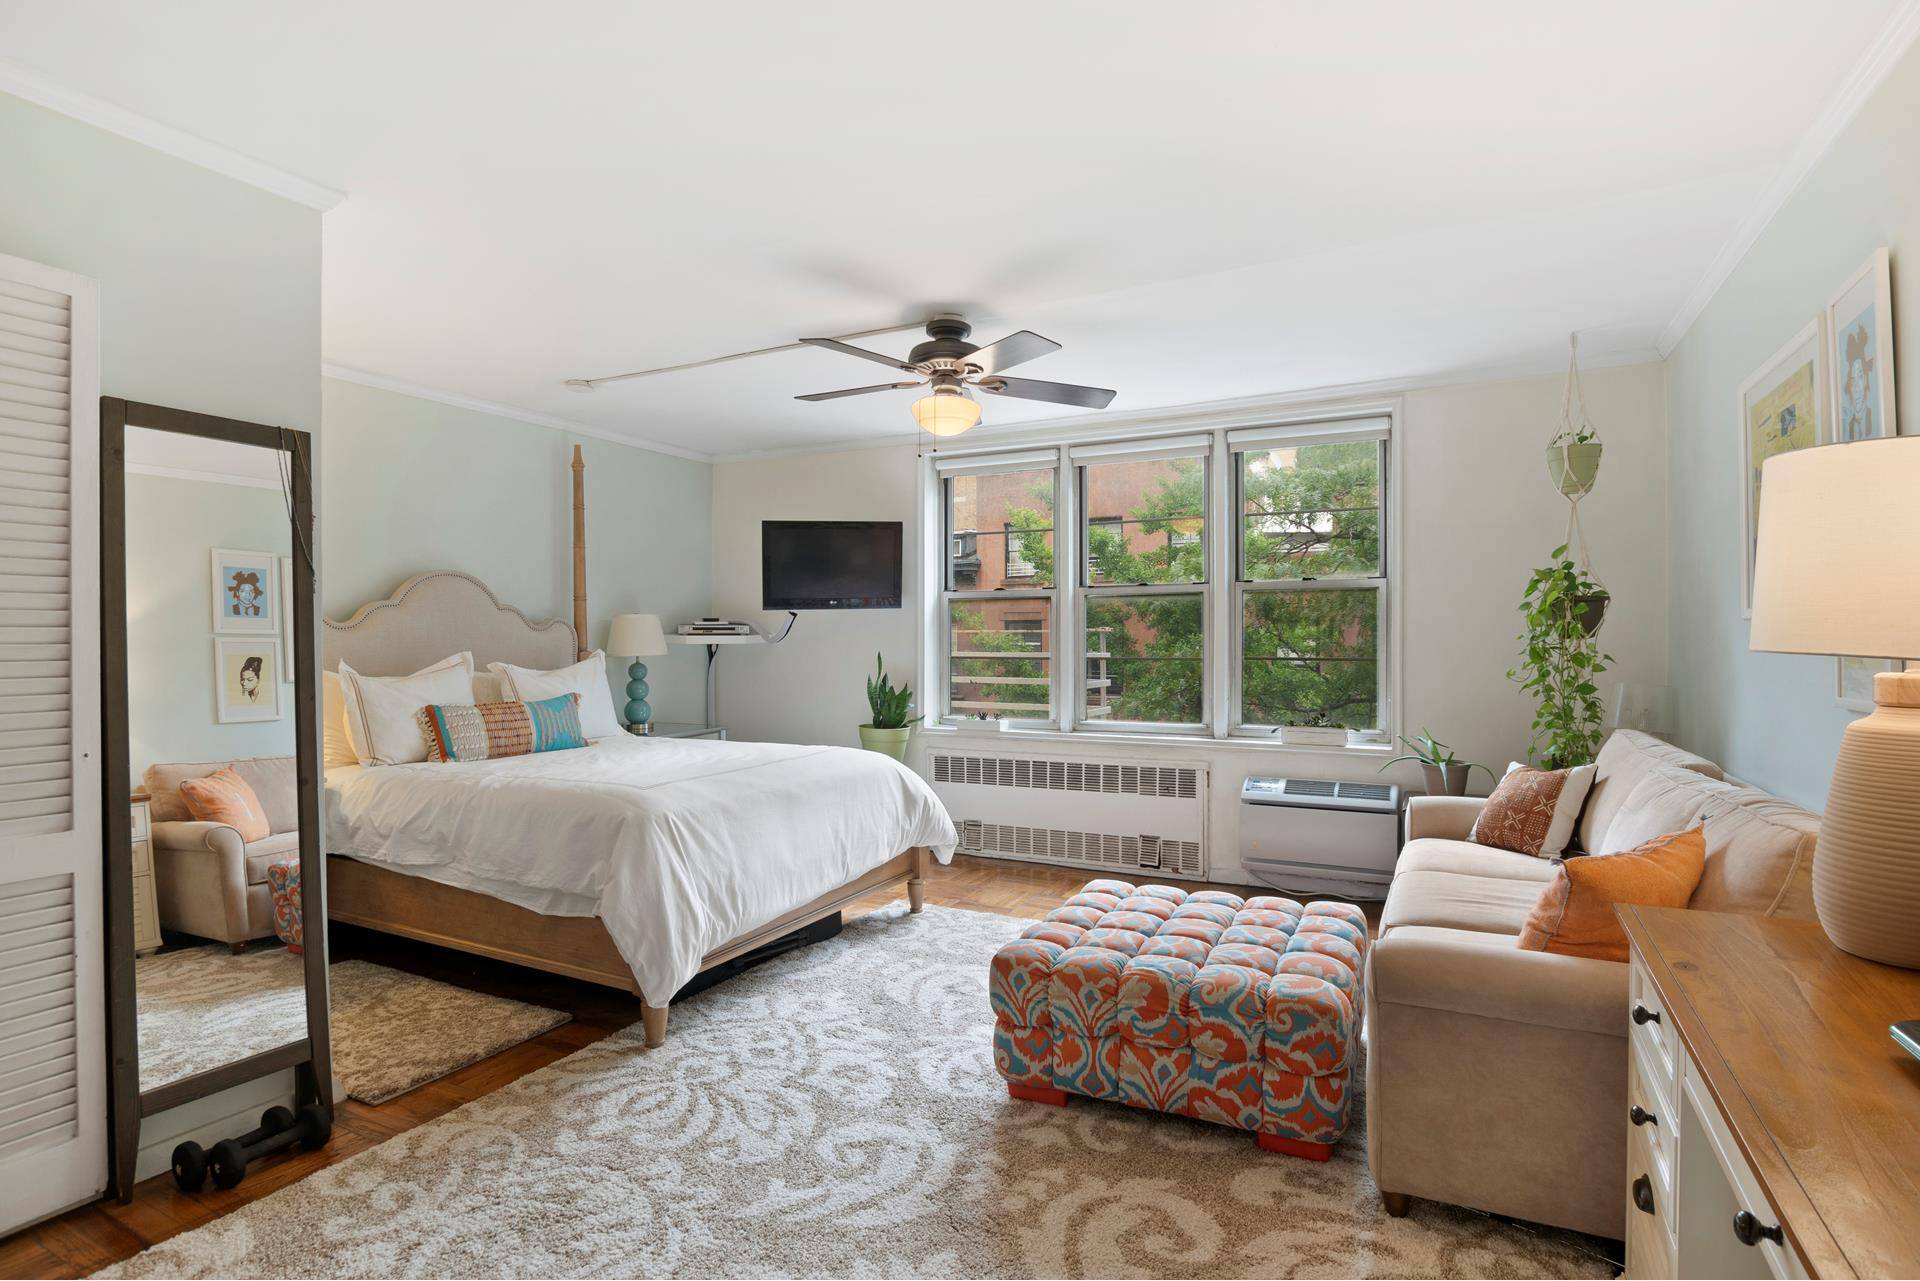 Located in Prime Brooklyn Heights this charming turn key studio is spacious, flooded with natural light and overlooks one of Brooklyn's most desirable tree lined blocks Hicks Street.